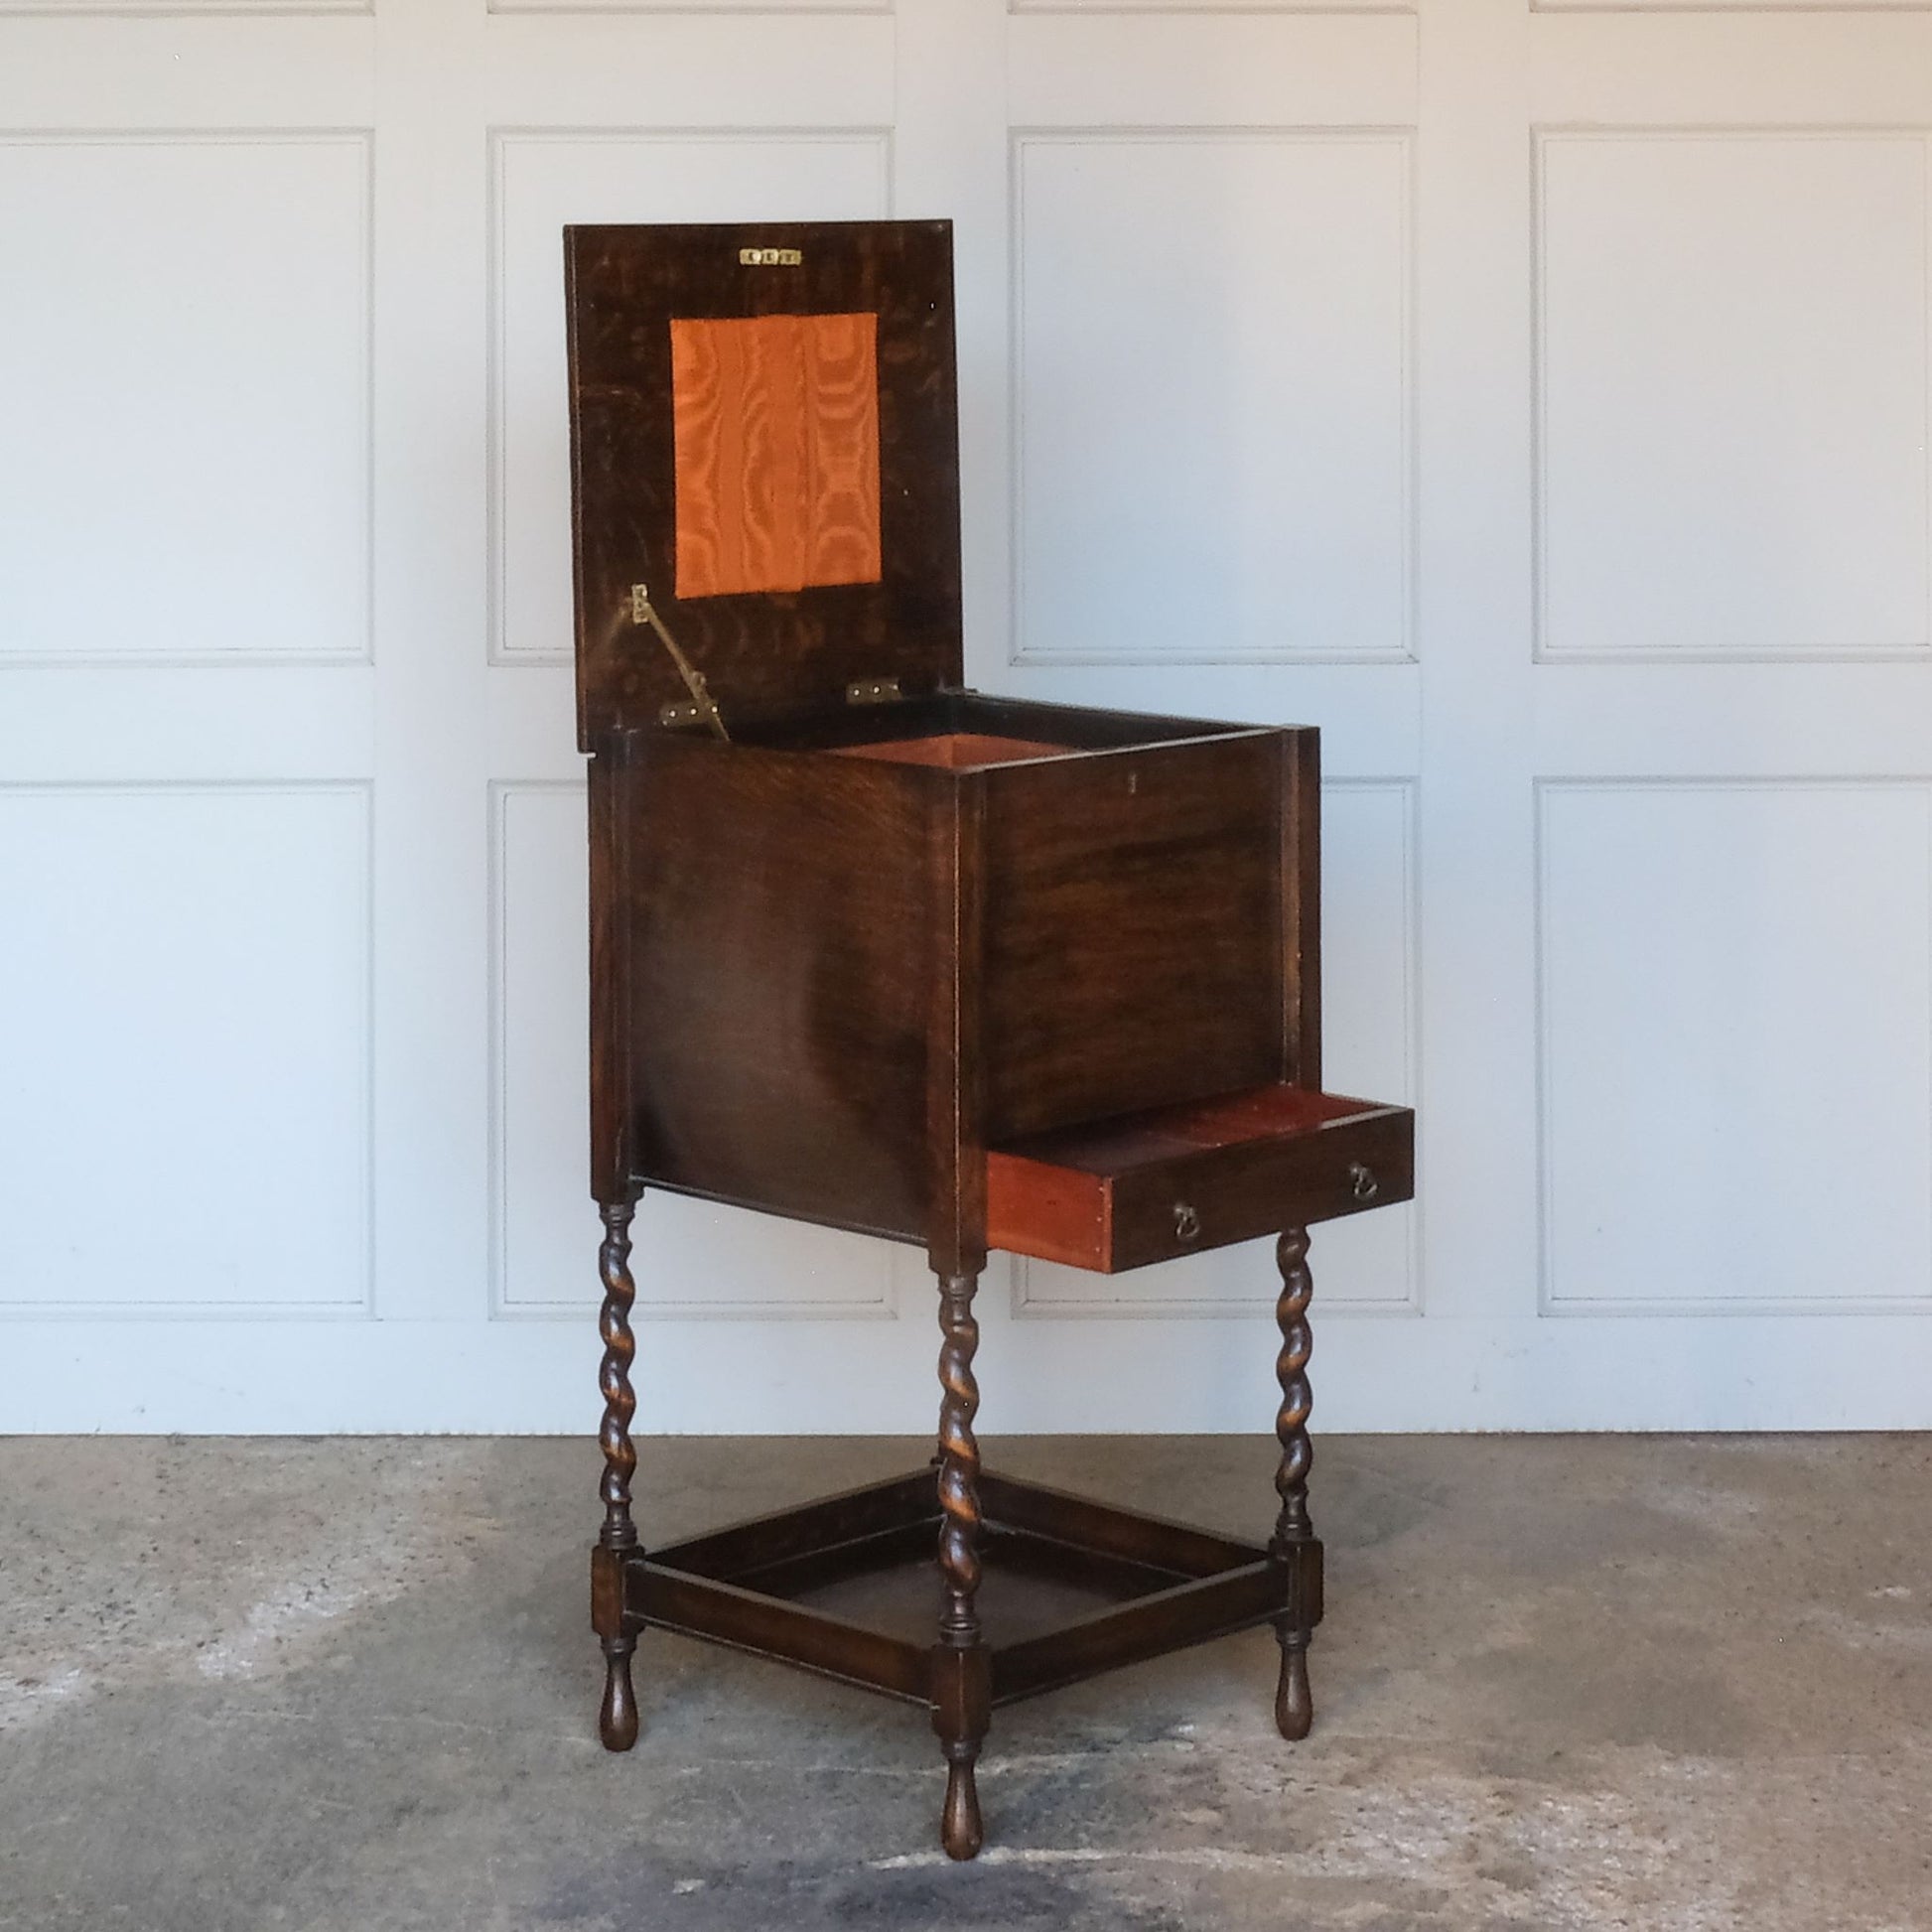 A late 19th / early 20th century oak sewing table, with a hinged top and single drawer below, on elegant barley twist supports over a single shelf and turned feet, the interior of the upper cabinet and drawer lined with burnt orange silk padding, with some age related patina, in very good condition. It would make a lovely bedside table.